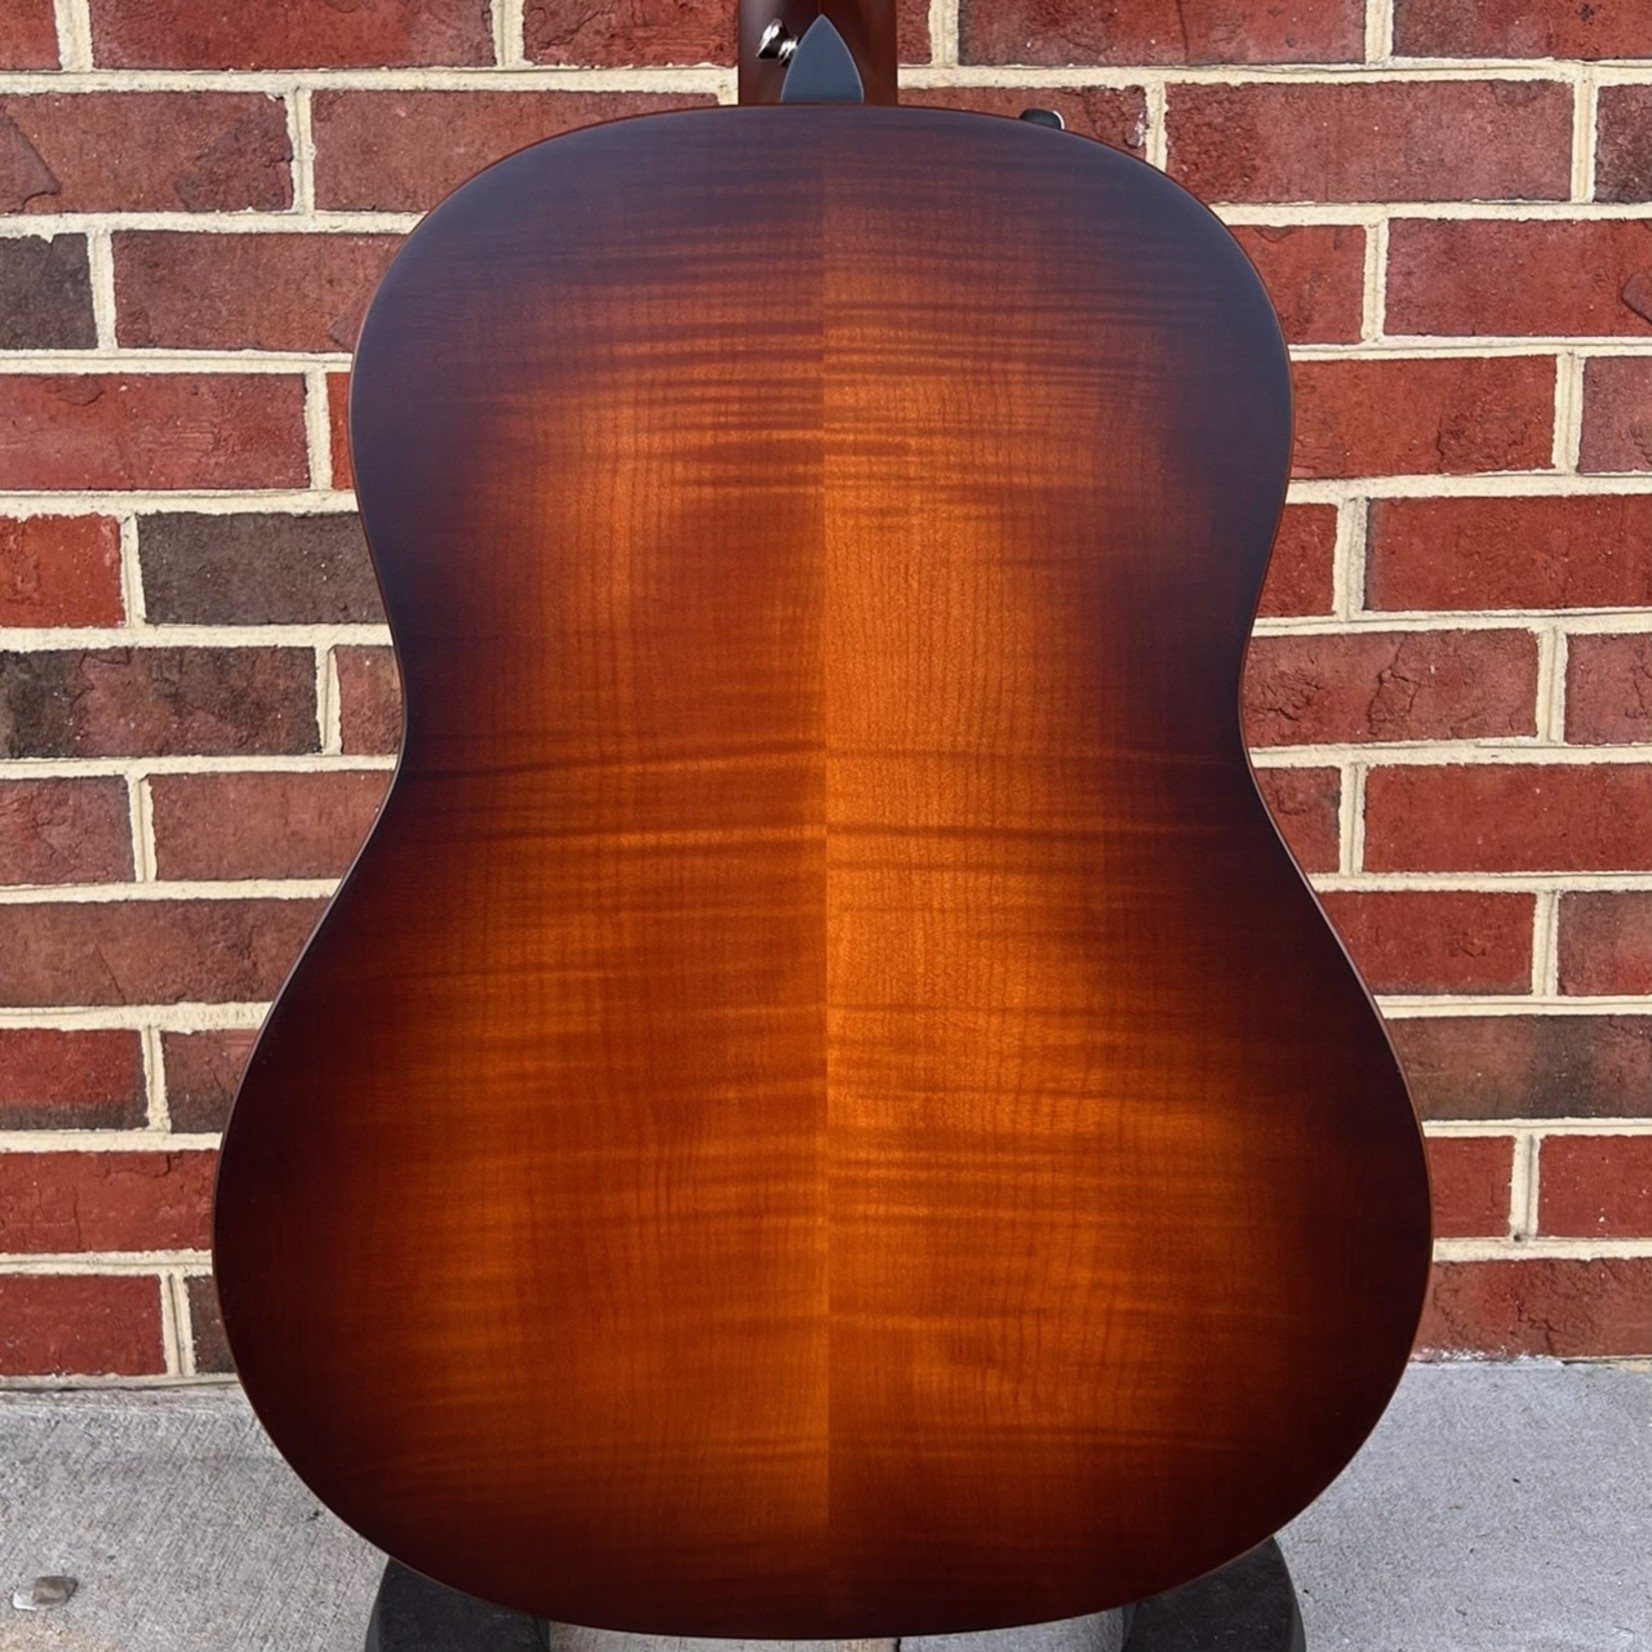 Taylor Taylor AD27e Flametop, Flame Maple Top, Flame Maple Back and Sides, ES2 Electronics, Aero Case